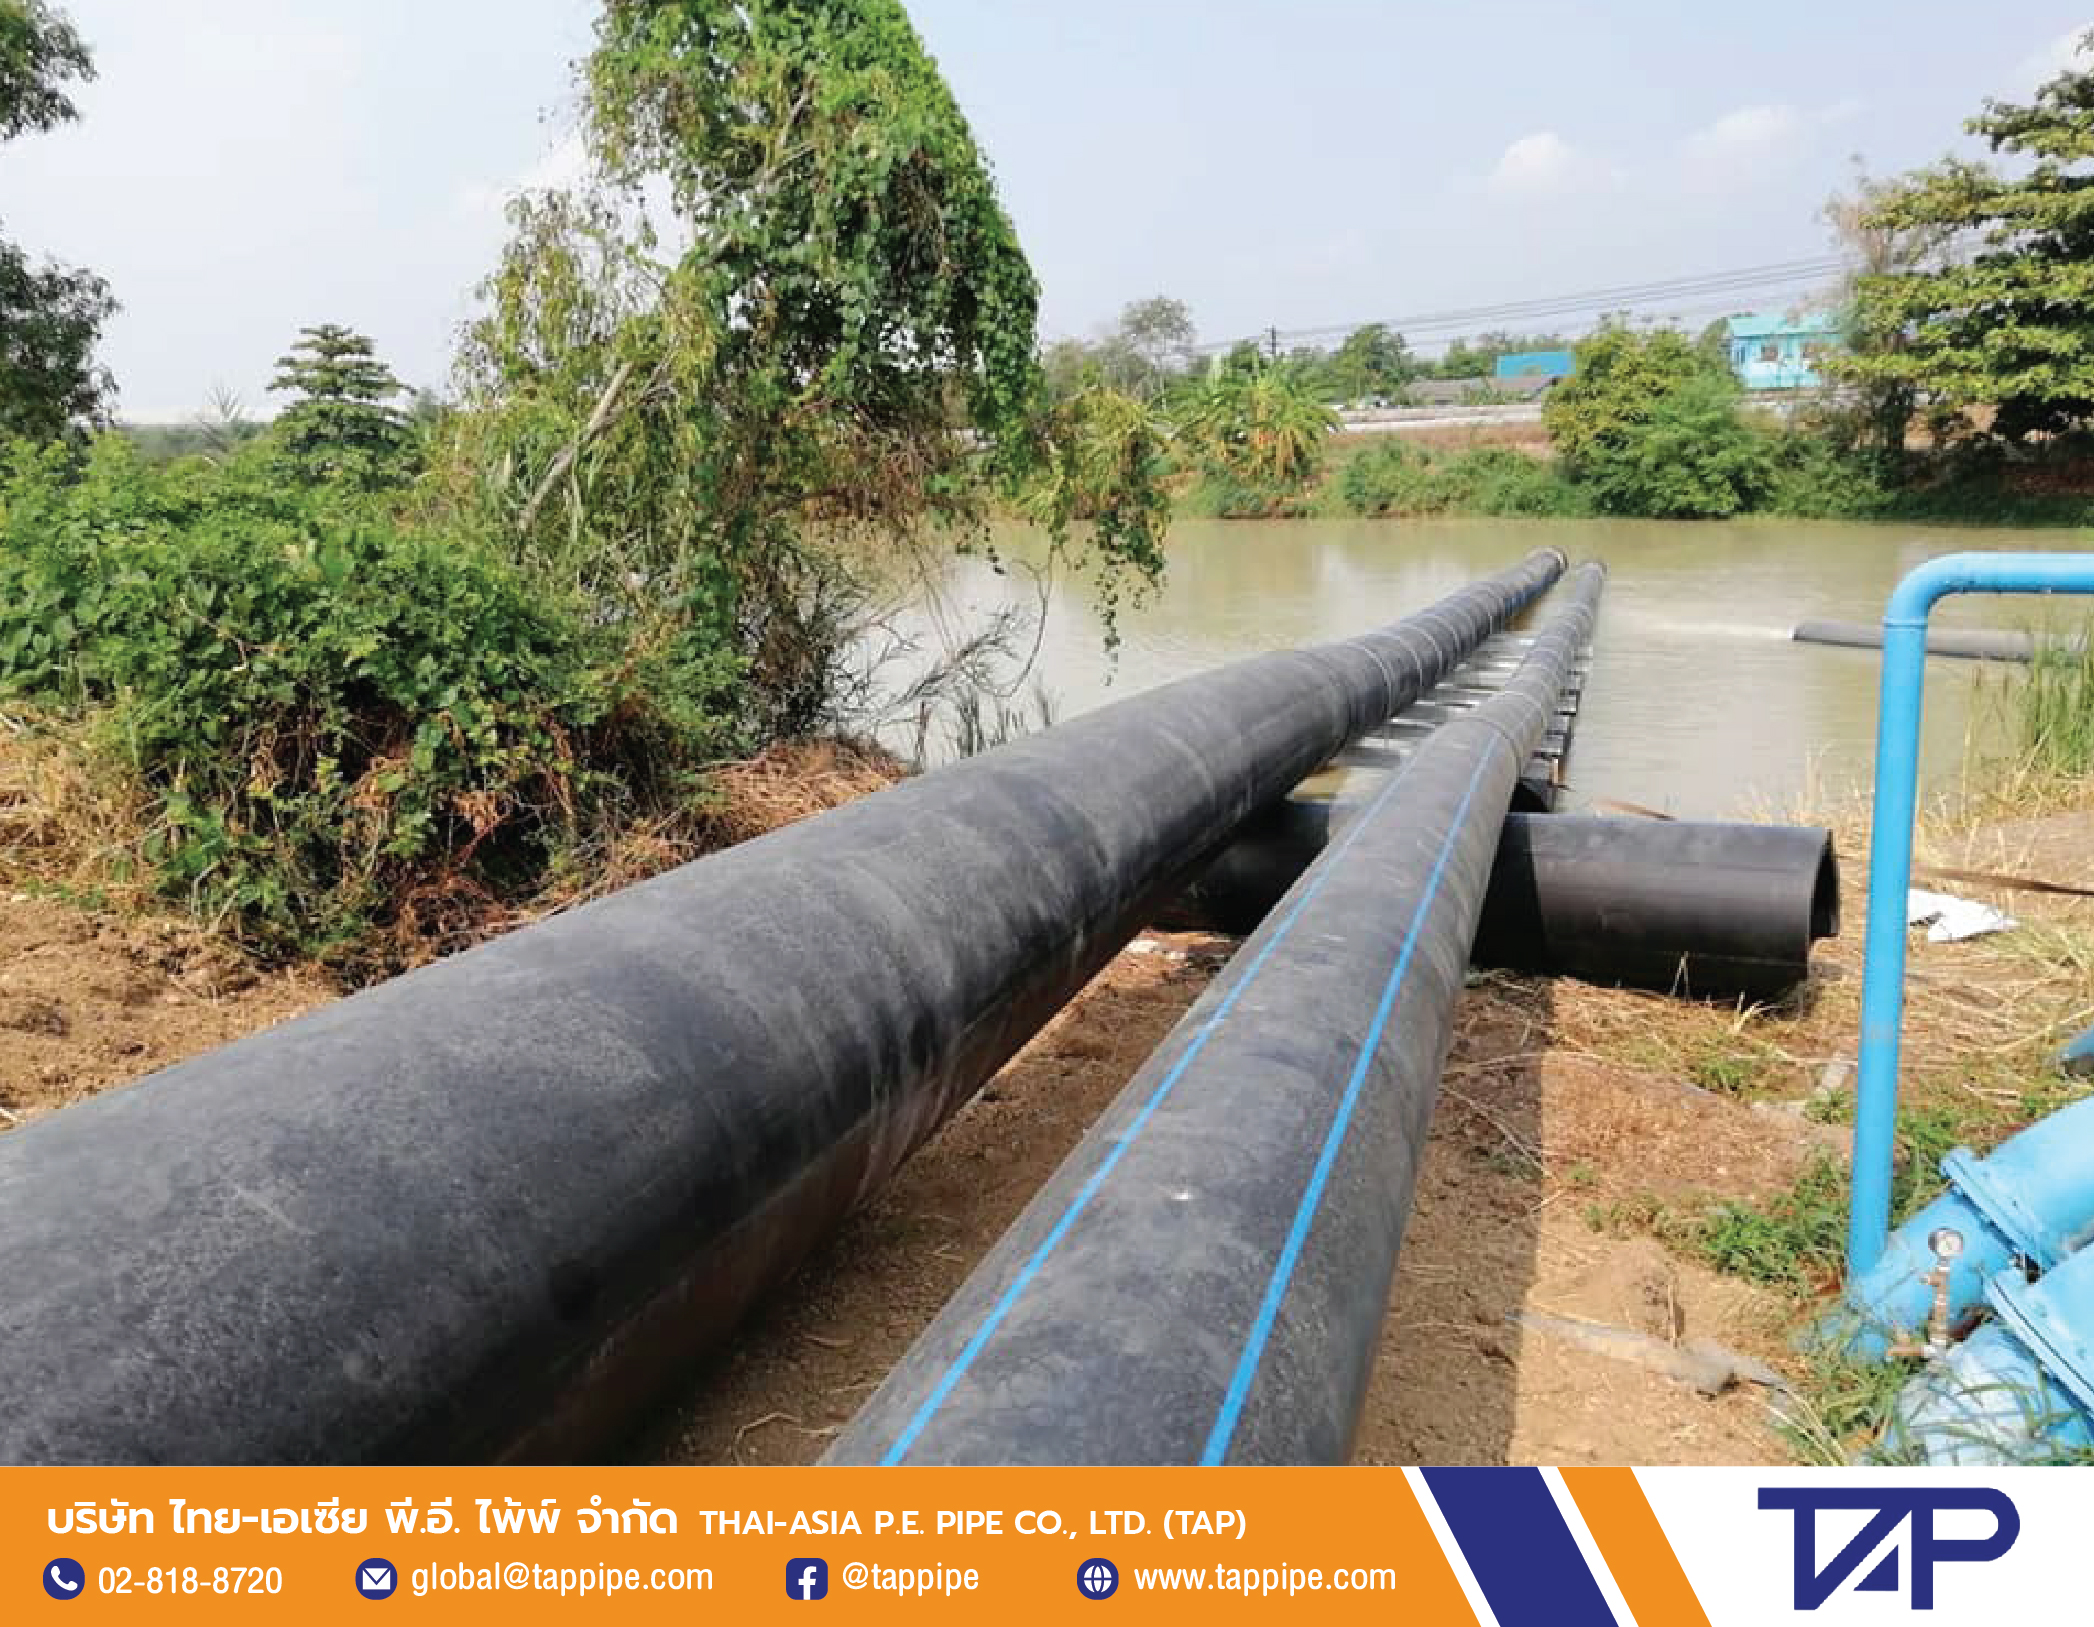 The HDPE pipe installation project is being carried out across the river